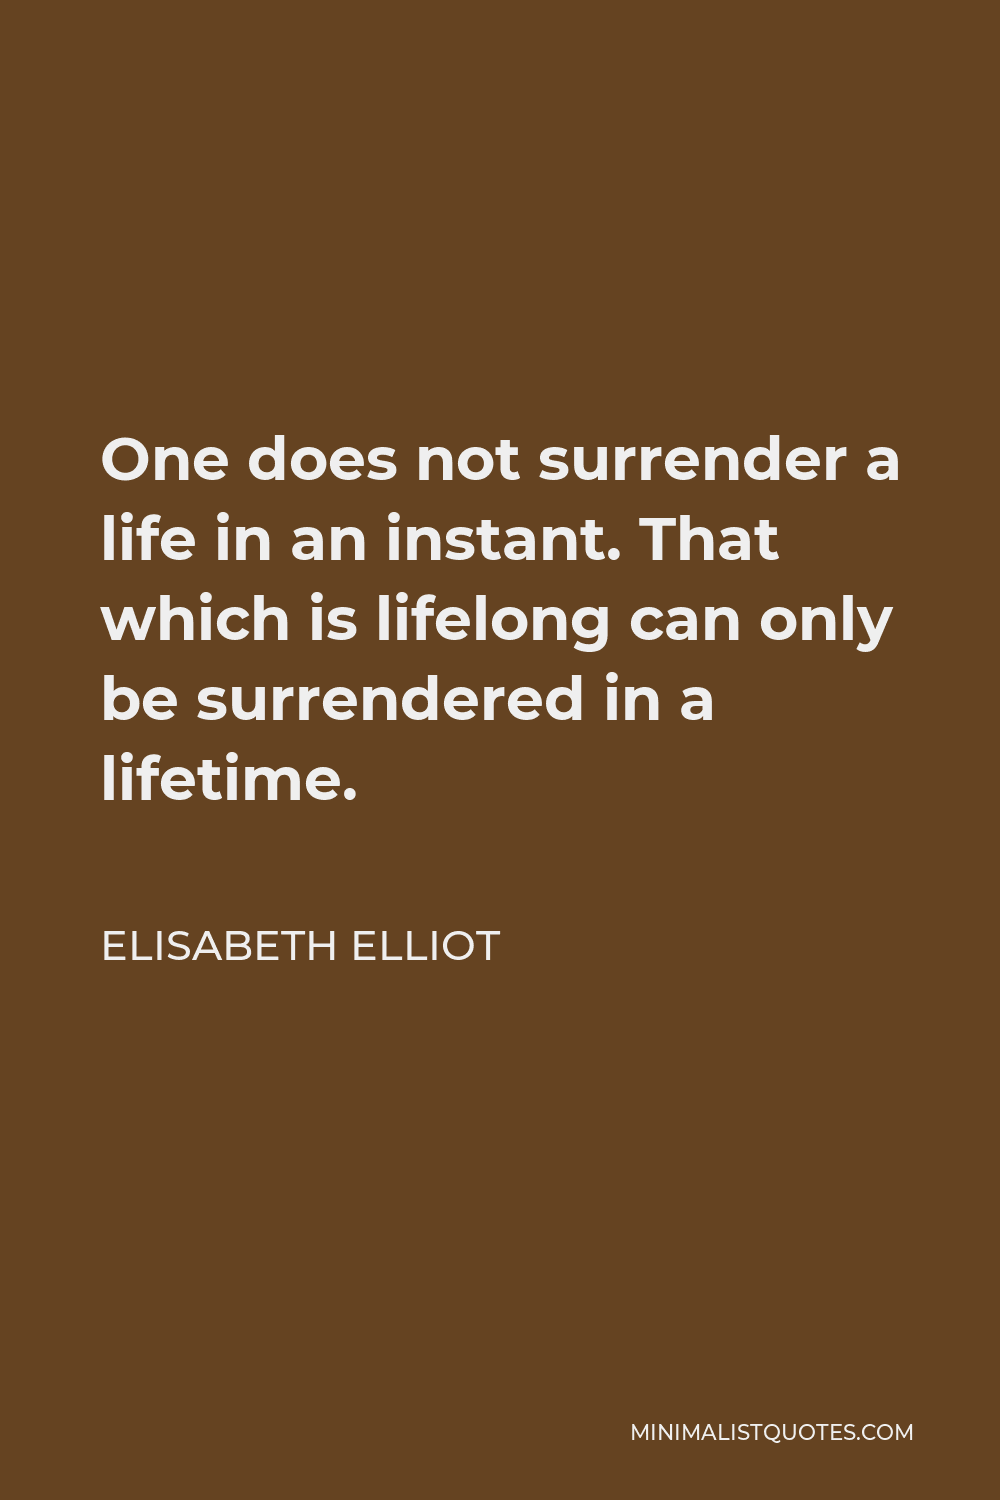 Elisabeth Elliot Quote - One does not surrender a life in an instant. That which is lifelong can only be surrendered in a lifetime.